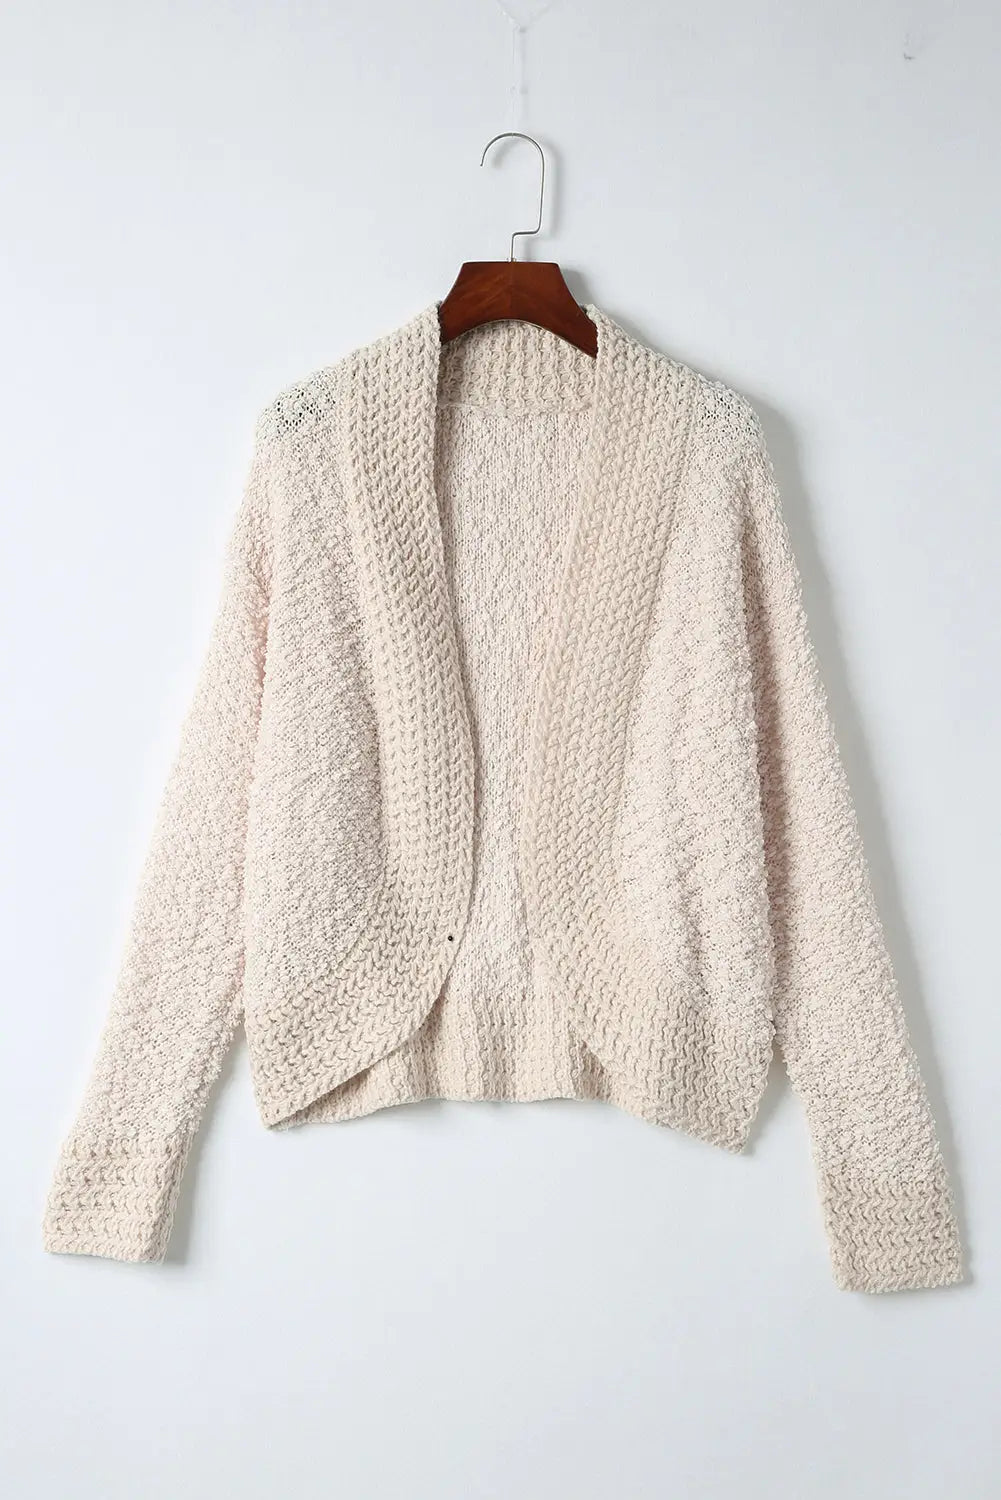 Apricot popcorn knit open front cardigan - tops